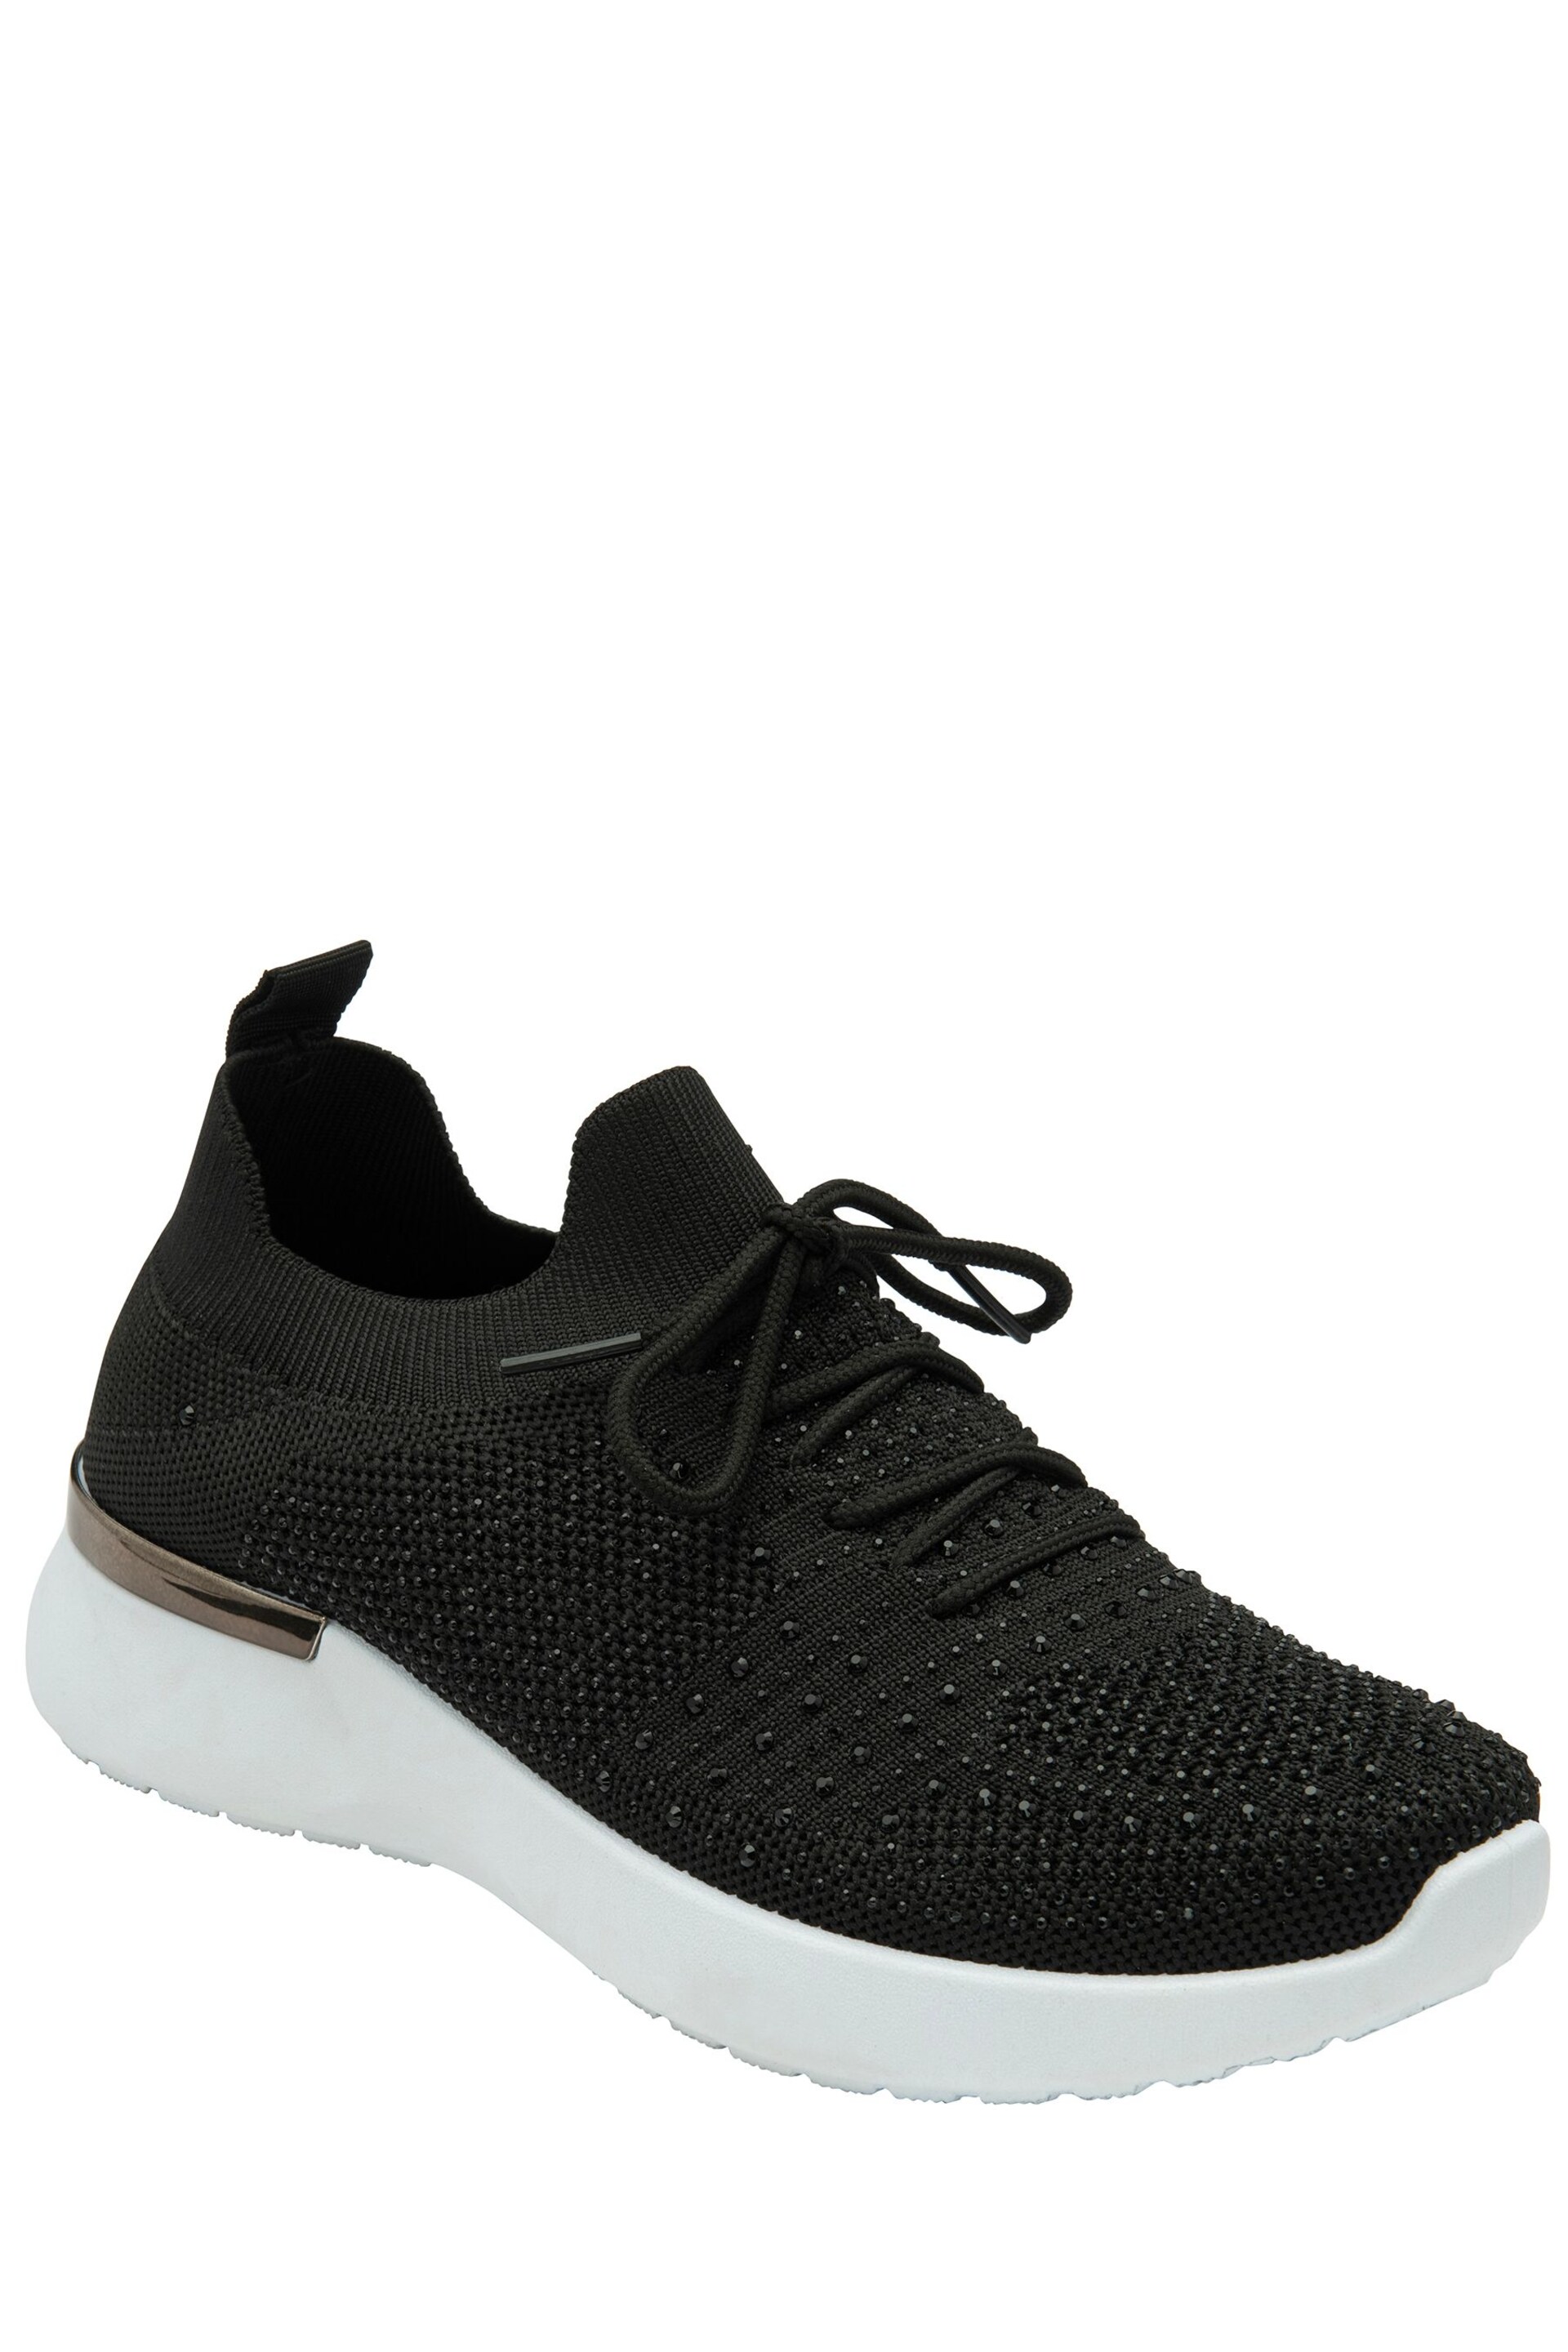 Lotus Black Casual Knit Trainers - Image 1 of 4